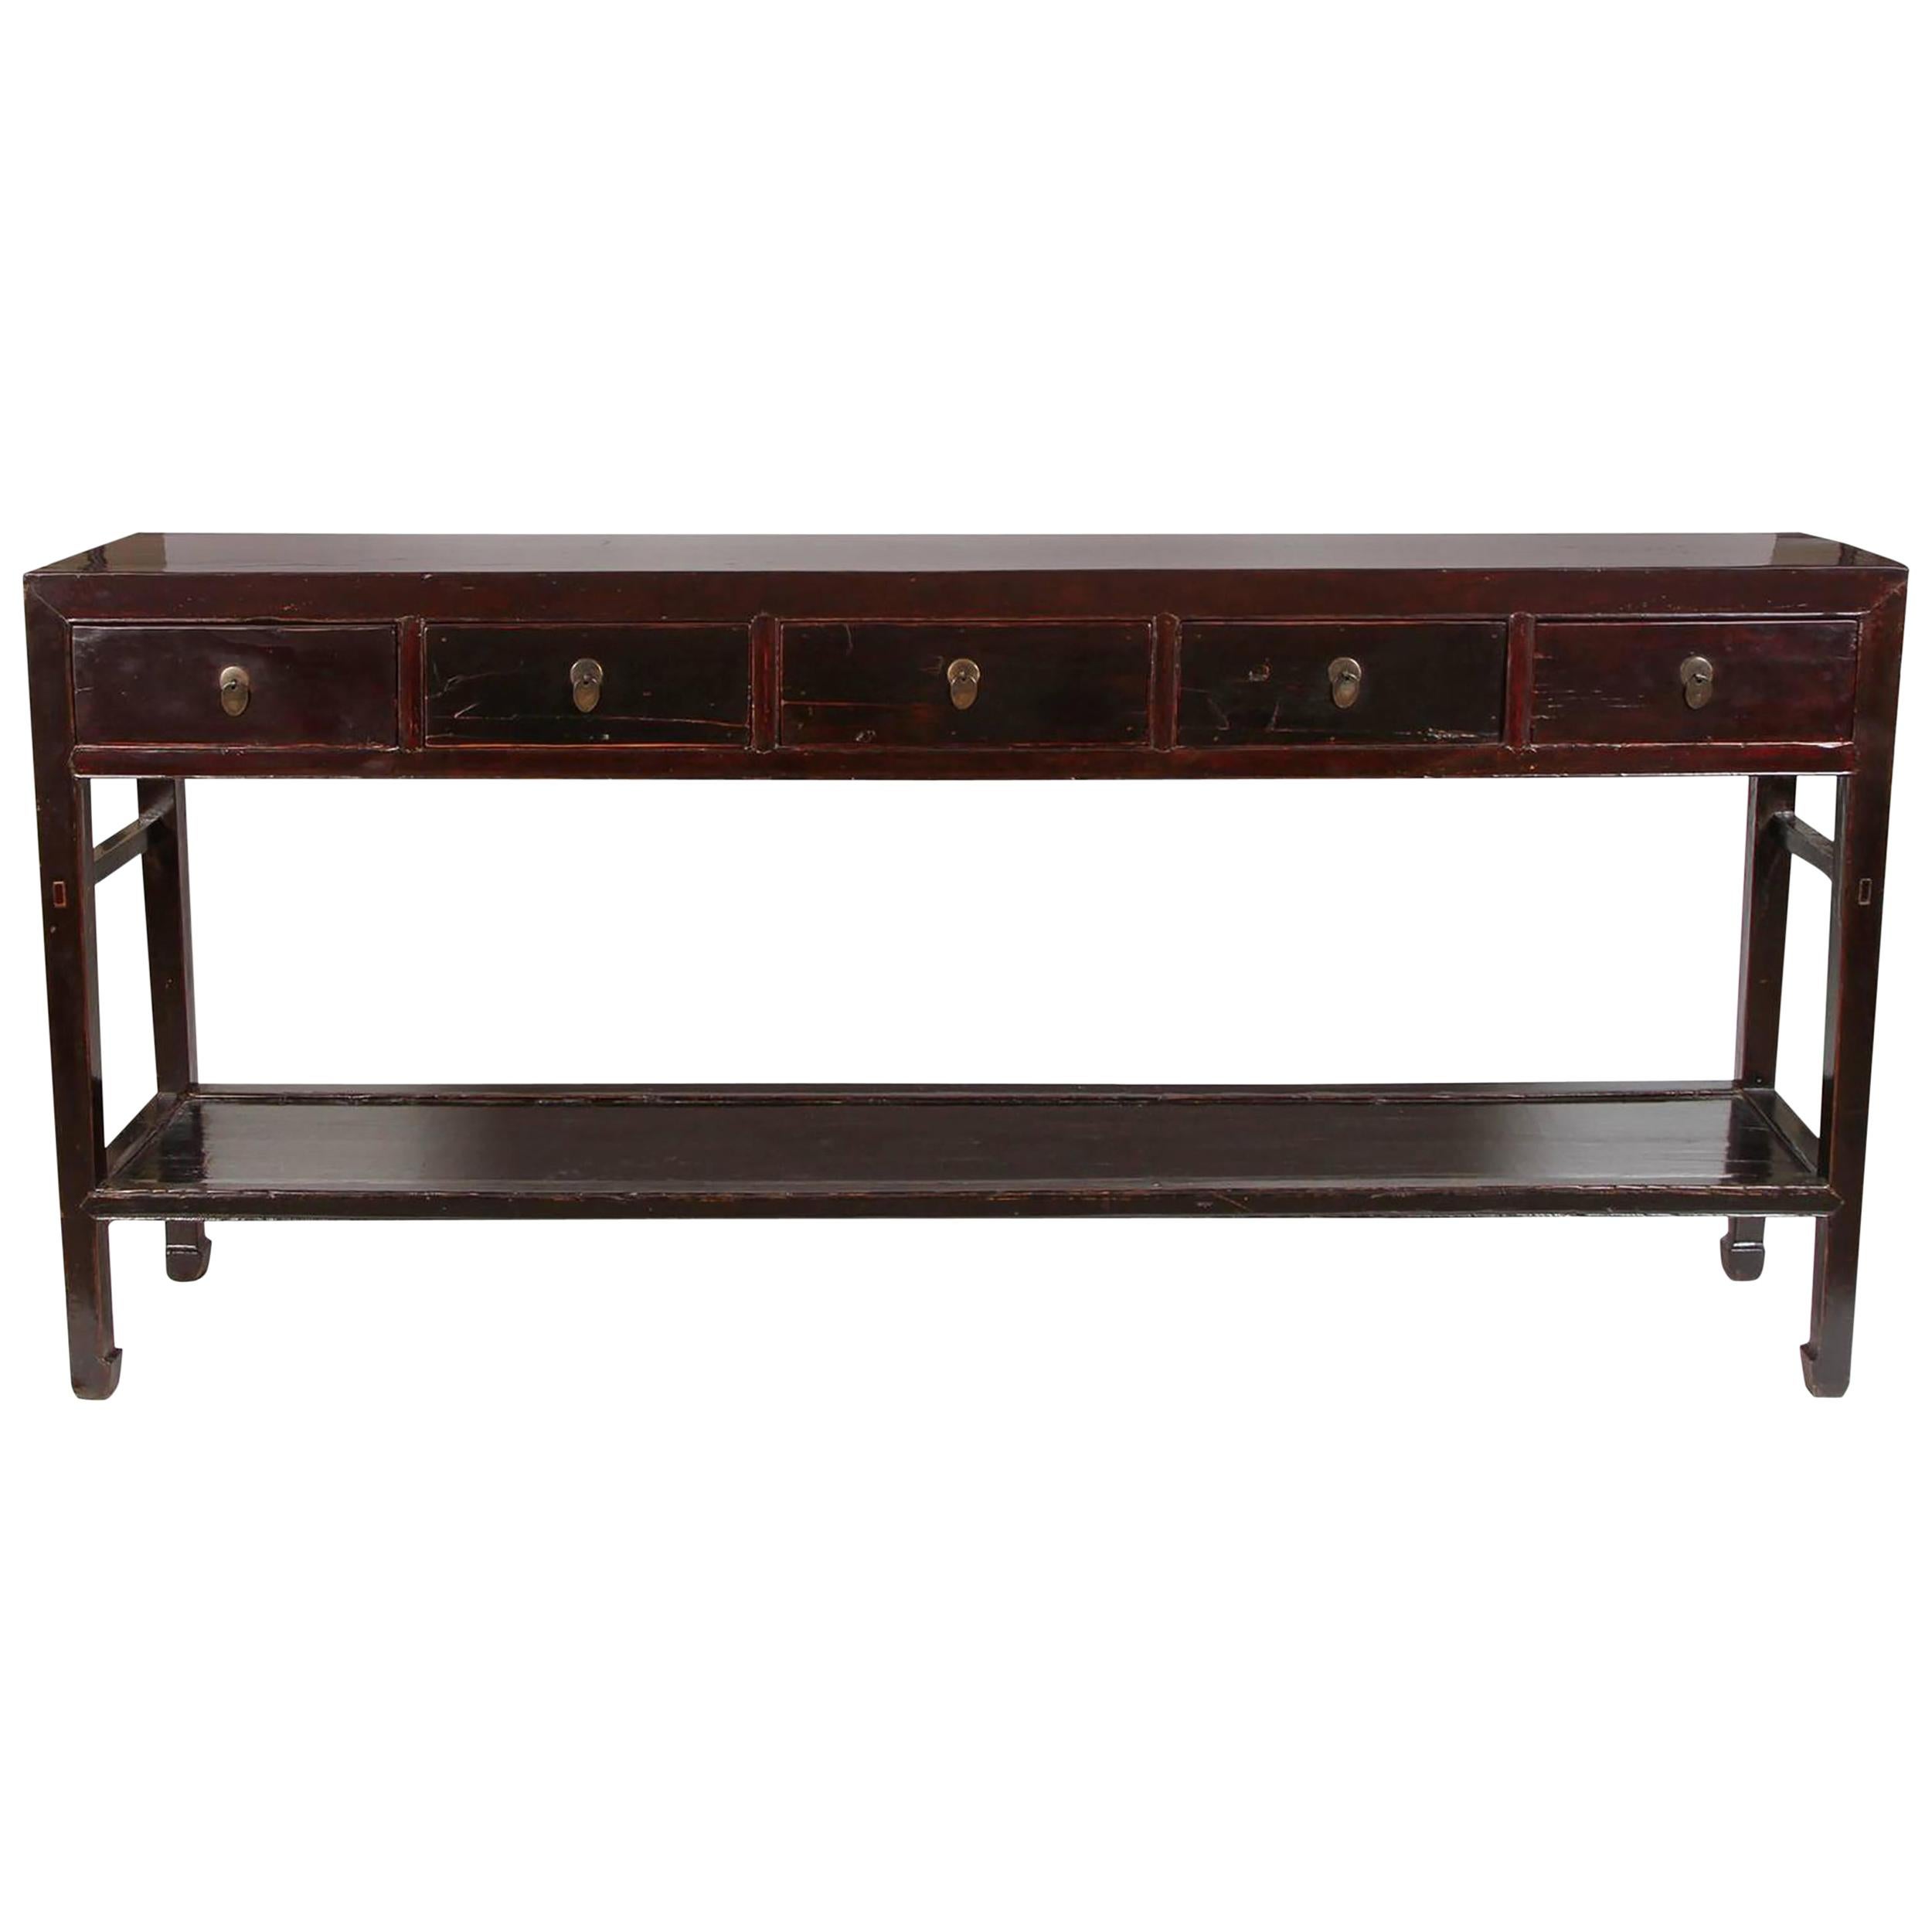 18th Century Chinese Lacquered Scholar's Table